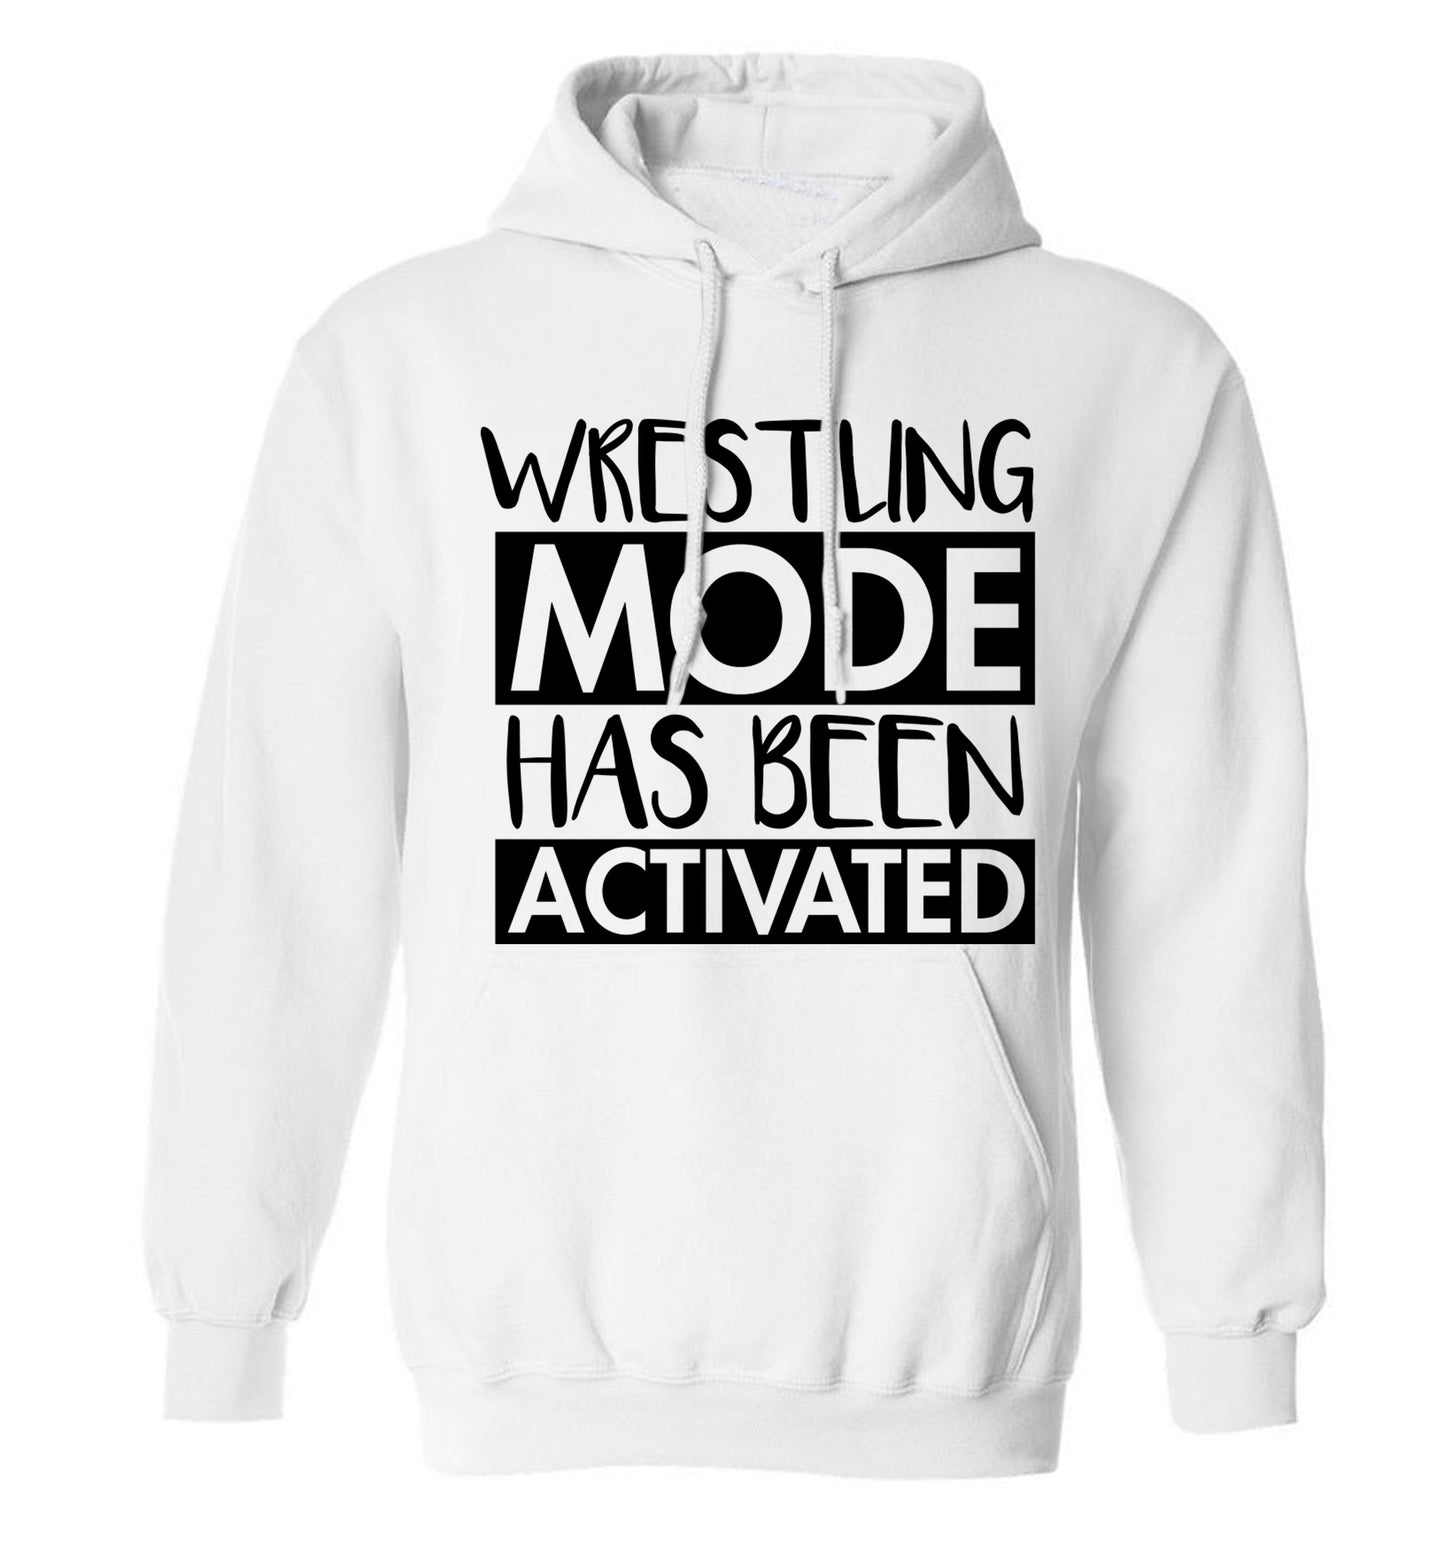 Wresting mode activated adults unisex white hoodie 2XL